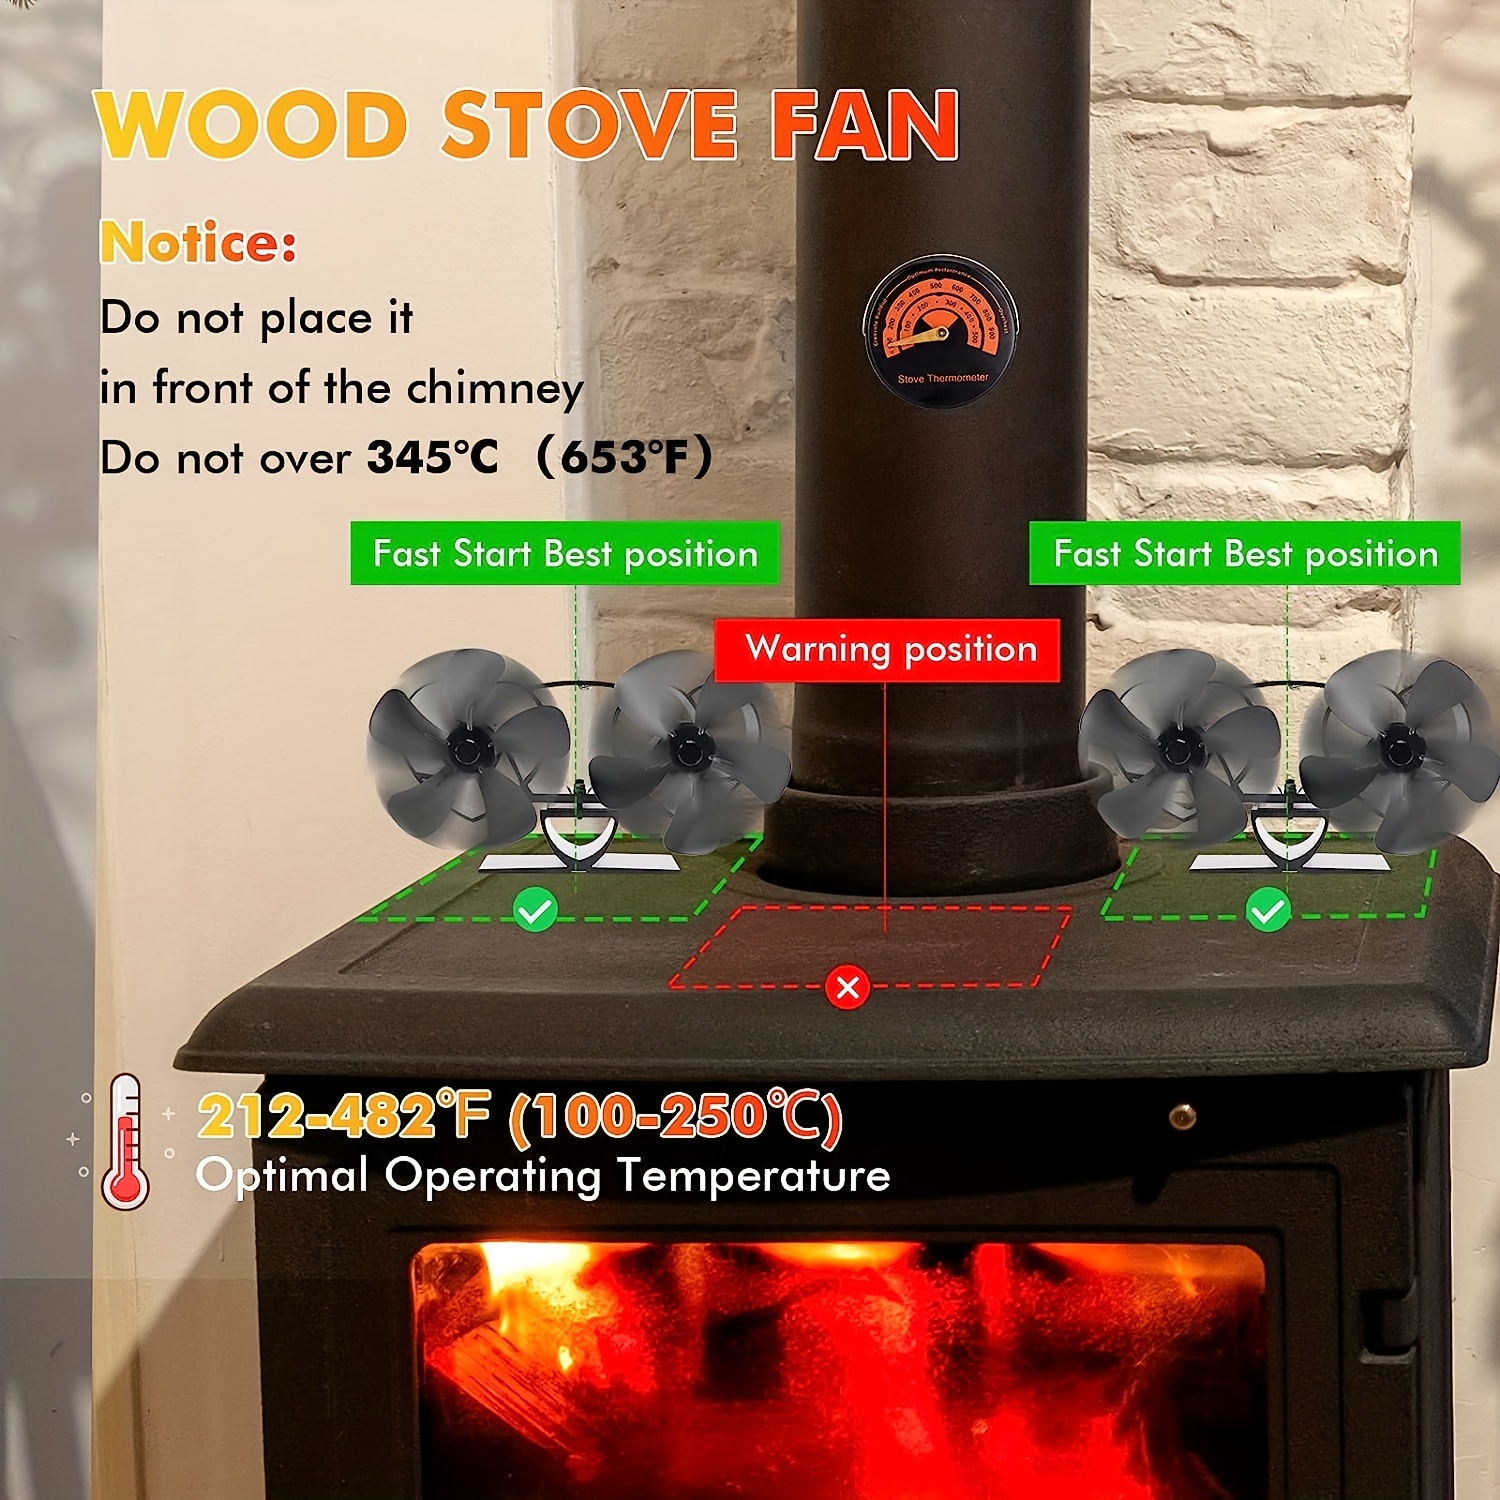 Wood Stove Thermometers (Explained Including Placement)